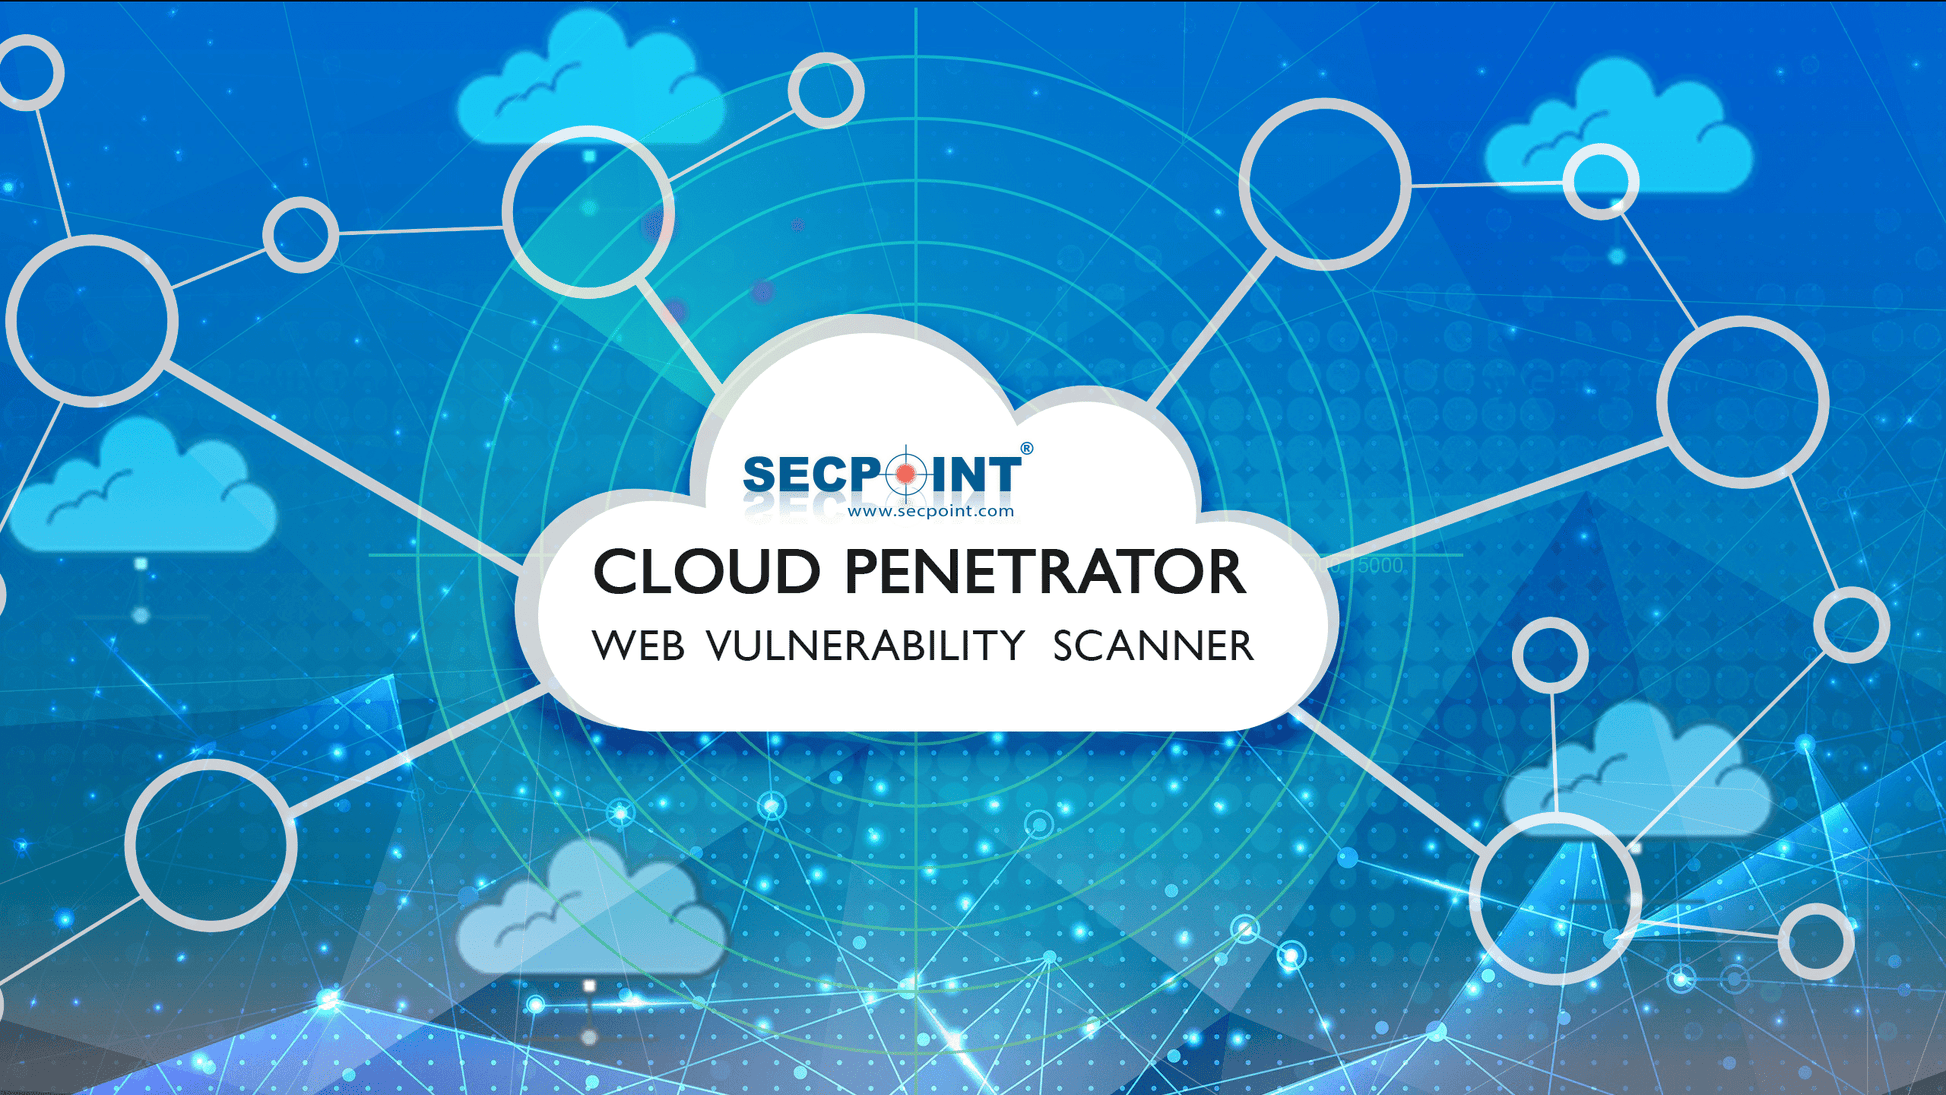 SecPoint Cloud Penetrator S9 - Vulnerability Scanning of 256 IPs  for 1 Year Static Scan License - SecPoint